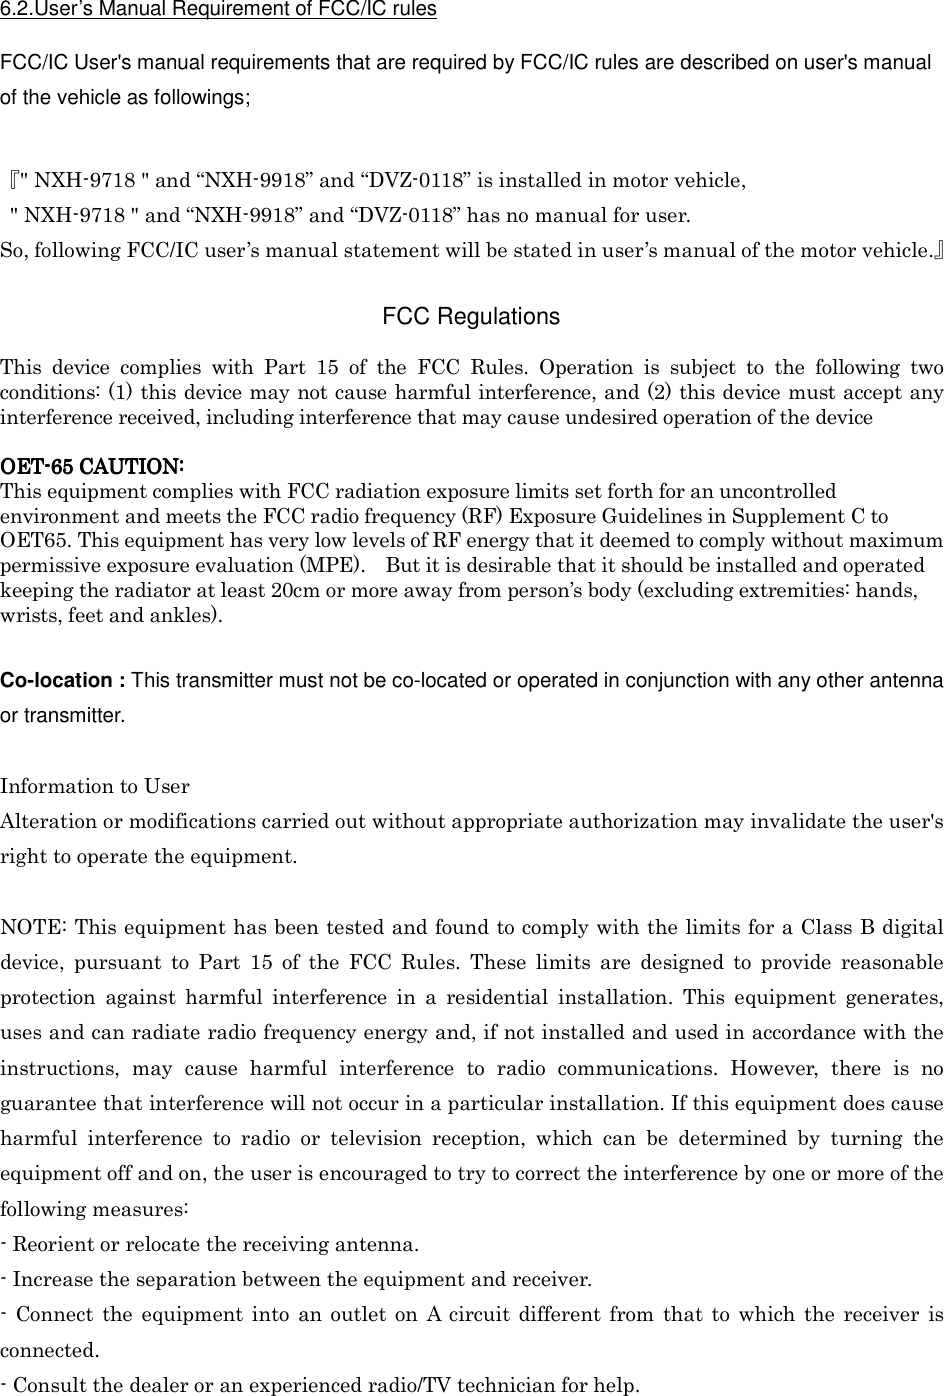  6.2.User’s Manual Requirement of FCC/IC rules  FCC/IC User&apos;s manual requirements that are required by FCC/IC rules are described on user&apos;s manual of the vehicle as followings;   『&quot; NXH-9718 &quot; and “NXH-9918” and “DVZ-0118” is installed in motor vehicle,   &quot; NXH-9718 &quot; and “NXH-9918” and “DVZ-0118” has no manual for user. So, following FCC/IC user’s manual statement will be stated in user’s manual of the motor vehicle.』  FCC Regulations  This  device  complies  with  Part  15  of  the  FCC  Rules.  Operation  is  subject  to  the  following  two conditions: (1) this device may not cause harmful interference, and (2) this device must accept any interference received, including interference that may cause undesired operation of the device  OETOETOETOET----65656565    CAUTION:CAUTION:CAUTION:CAUTION:    This equipment complies with FCC radiation exposure limits set forth for an uncontrolled environment and meets the FCC radio frequency (RF) Exposure Guidelines in Supplement C to OET65. This equipment has very low levels of RF energy that it deemed to comply without maximum permissive exposure evaluation (MPE).    But it is desirable that it should be installed and operated keeping the radiator at least 20cm or more away from person’s body (excluding extremities: hands, wrists, feet and ankles).  Co-location : This transmitter must not be co-located or operated in conjunction with any other antenna or transmitter.  Information to User Alteration or modifications carried out without appropriate authorization may invalidate the user&apos;s right to operate the equipment.  NOTE: This equipment has been tested and found to comply with the limits for a Class B digital device,  pursuant  to  Part  15  of  the  FCC  Rules.  These  limits  are  designed  to  provide  reasonable protection  against  harmful  interference  in  a  residential  installation.  This  equipment  generates, uses and can radiate radio frequency energy and, if not installed and used in accordance with the instructions,  may  cause  harmful  interference  to  radio  communications.  However,  there  is  no guarantee that interference will not occur in a particular installation. If this equipment does cause harmful  interference  to  radio  or  television  reception,  which  can  be  determined  by  turning  the equipment off and on, the user is encouraged to try to correct the interference by one or more of the following measures: - Reorient or relocate the receiving antenna. - Increase the separation between the equipment and receiver. -  Connect  the  equipment  into  an outlet  on  A  circuit  different  from  that  to  which  the receiver  is connected. - Consult the dealer or an experienced radio/TV technician for help. 